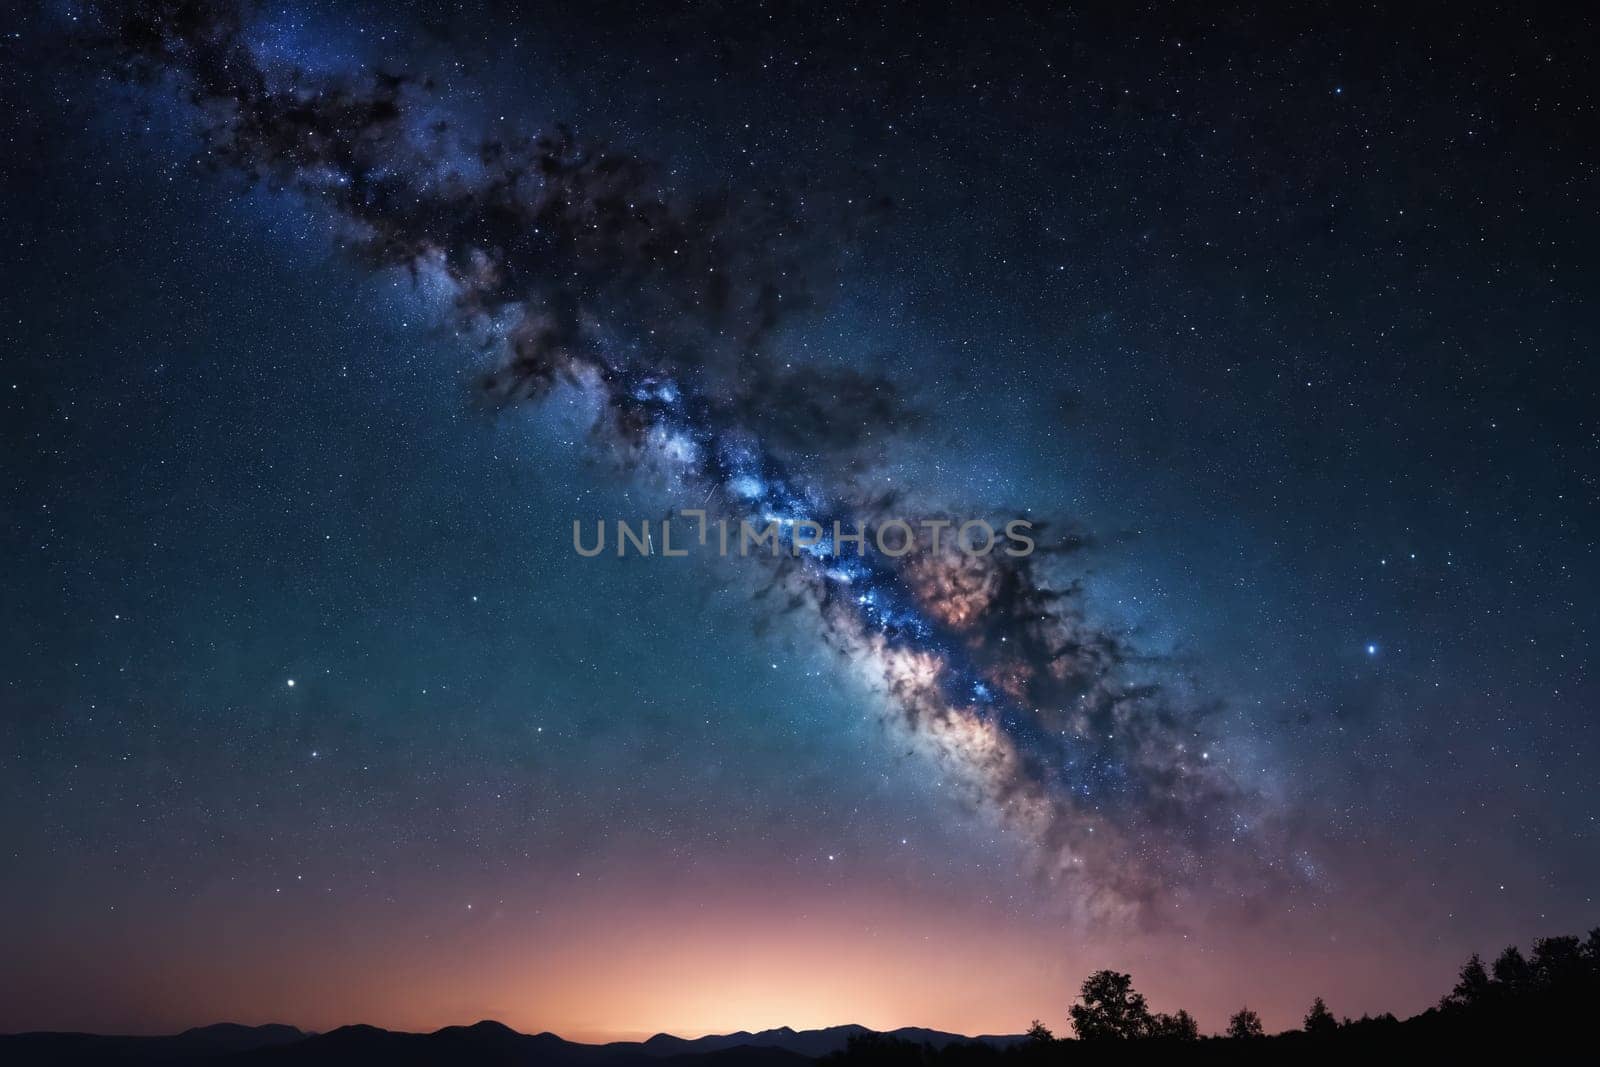 The image captures the charm of the Milky Way galaxy, making it perfect for cosmic-themed desktop wallpapers, galaxy-related articles, or inspiring space educational content.